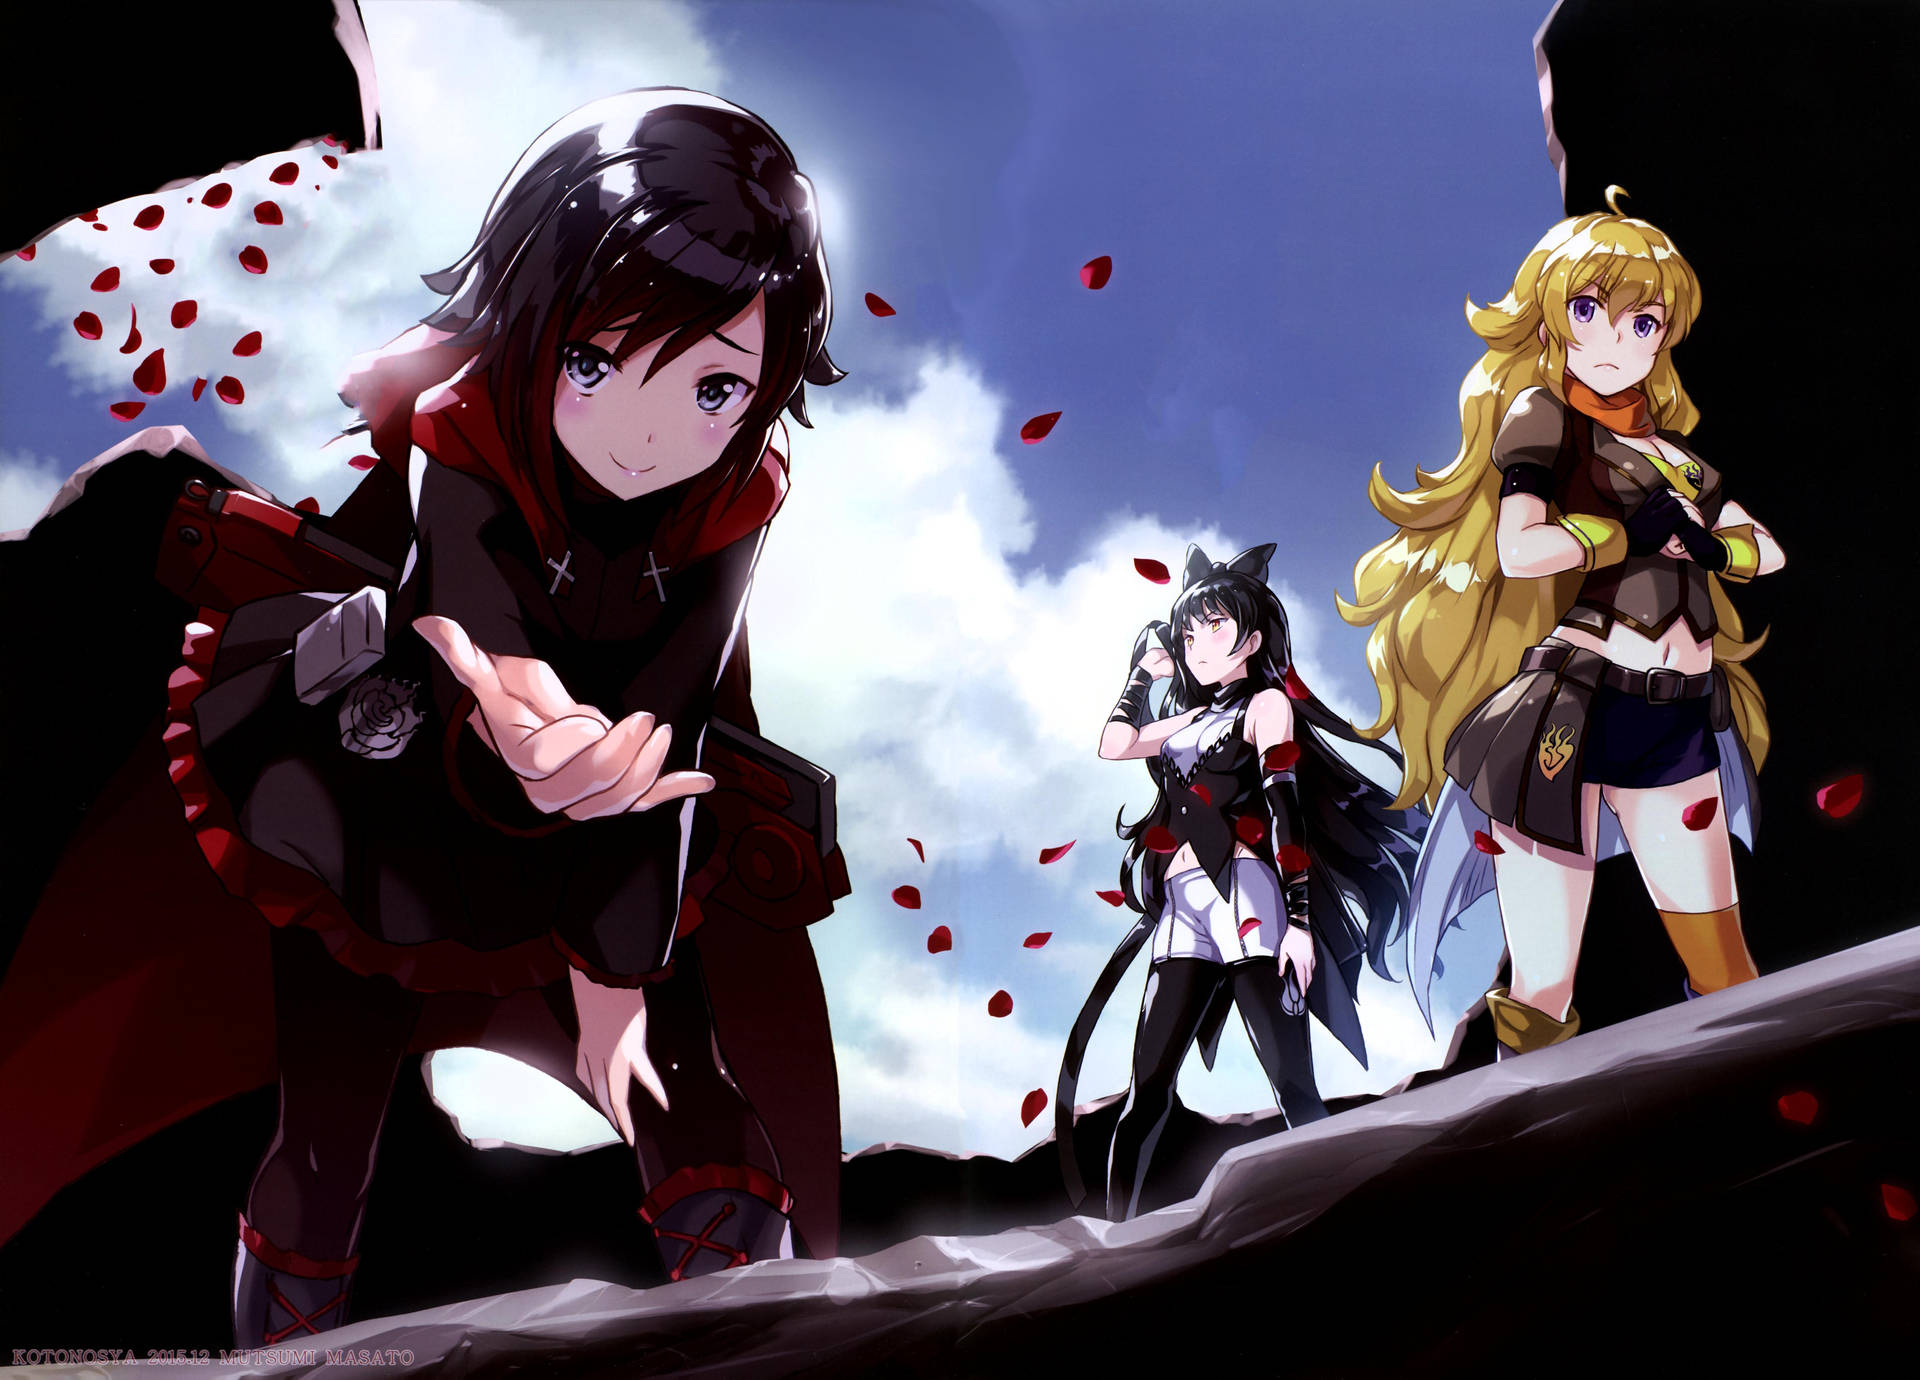 Rwby 4851X3487 Wallpaper and Background Image